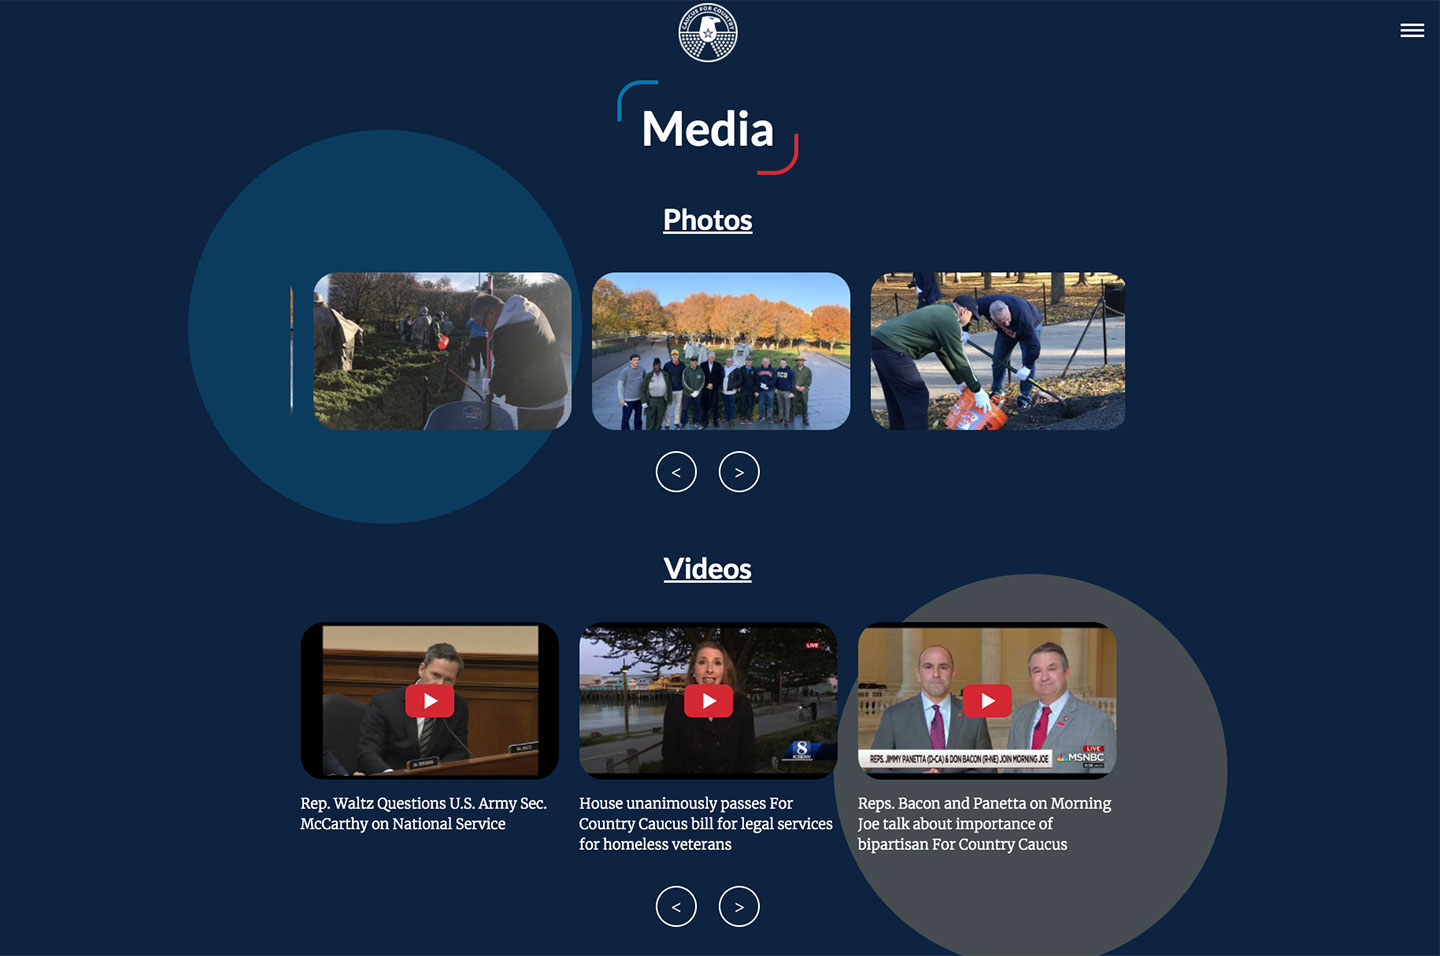 For Country Caucus page media section. A carousel of three photos and then below that another carousel of three videos.